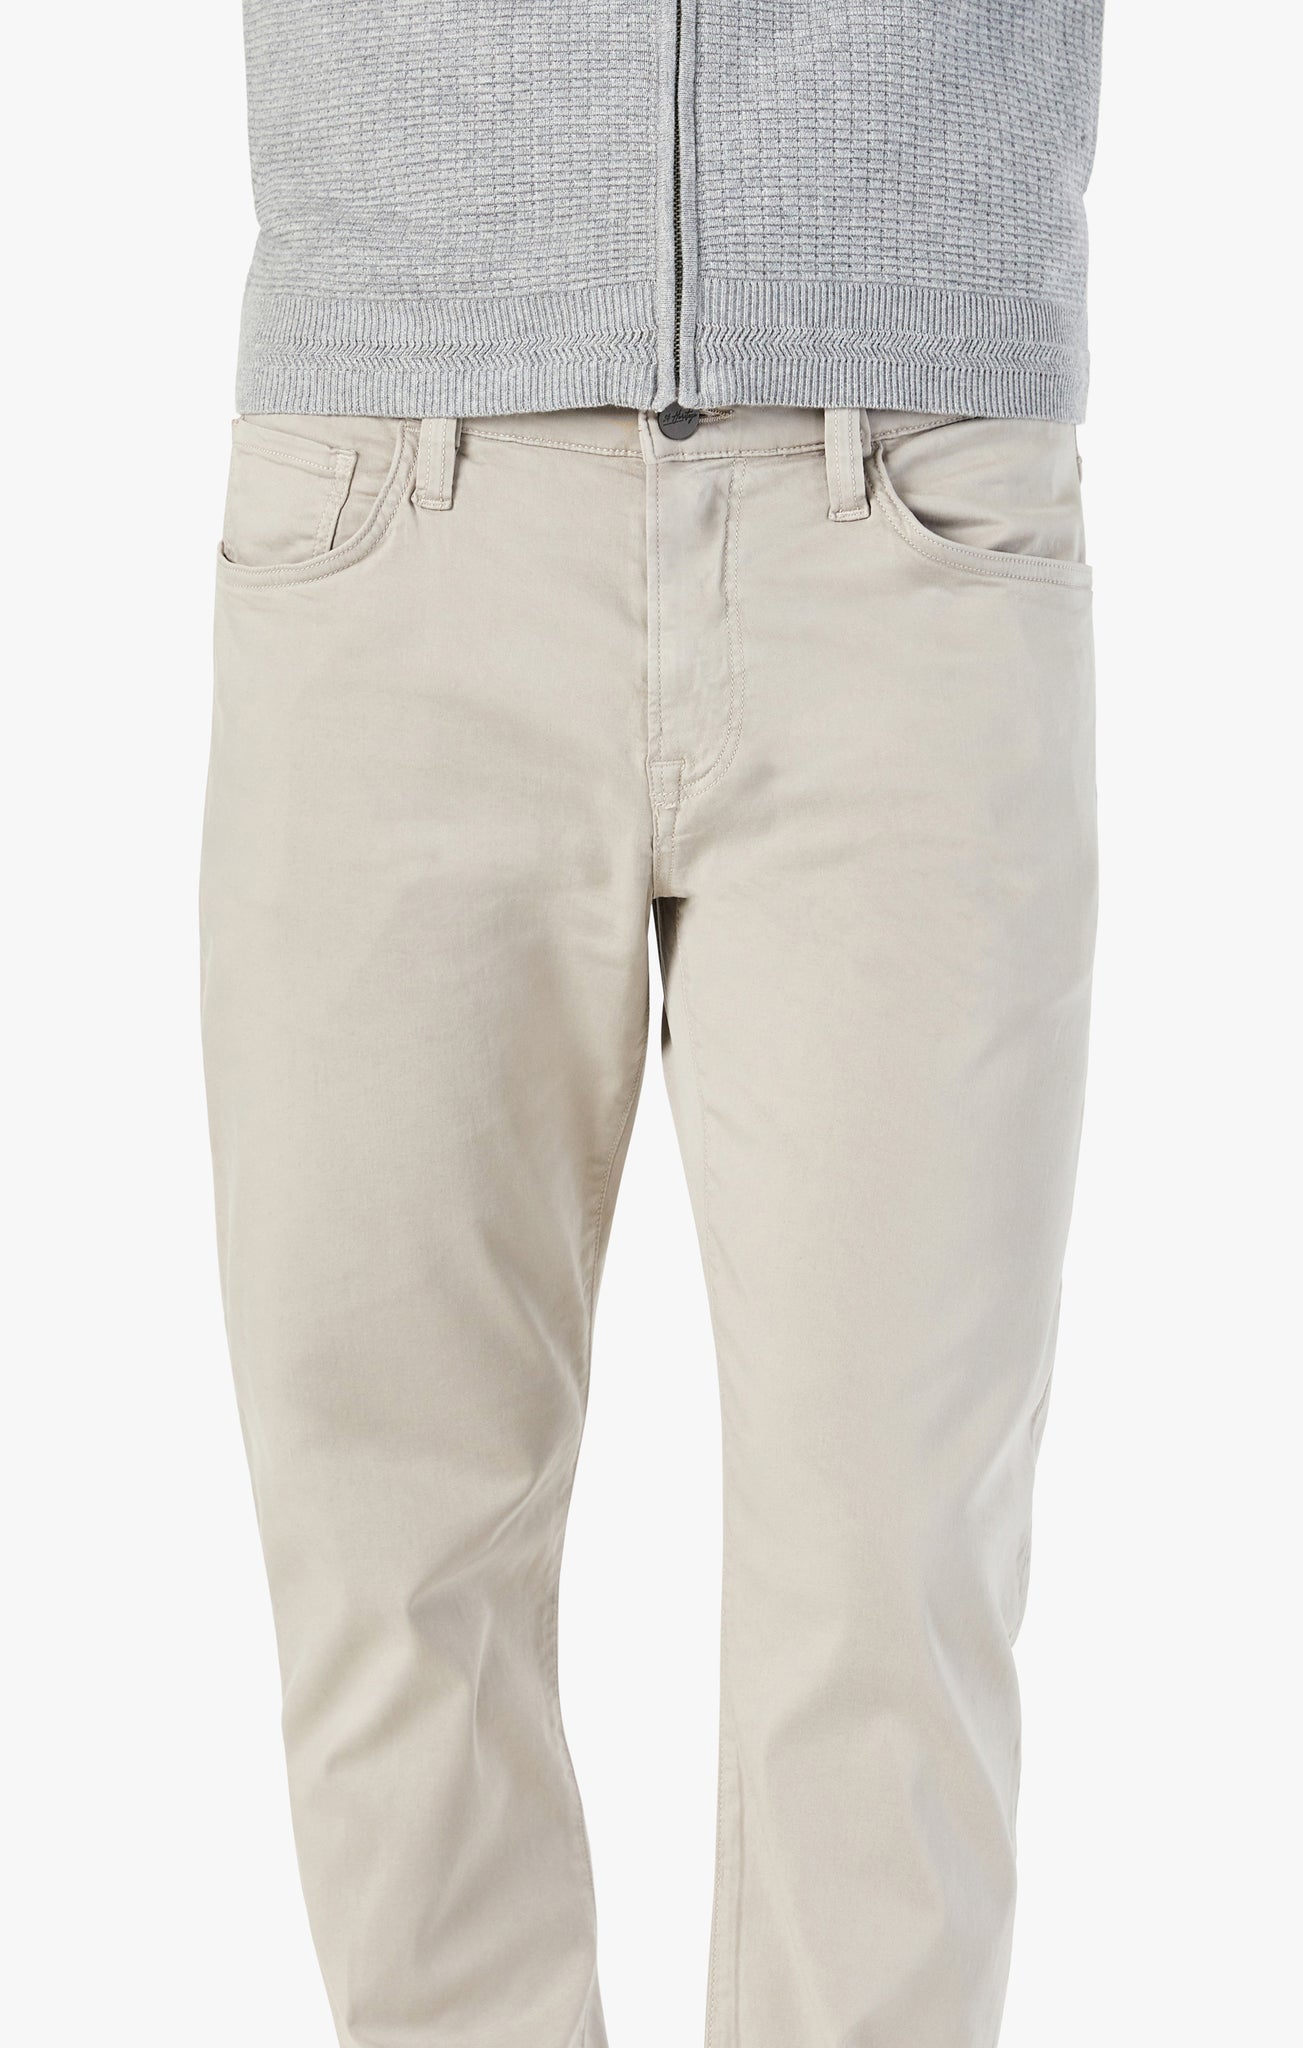 34 Heritage Men's Courage Straight Leg Pants in Dawn Twill